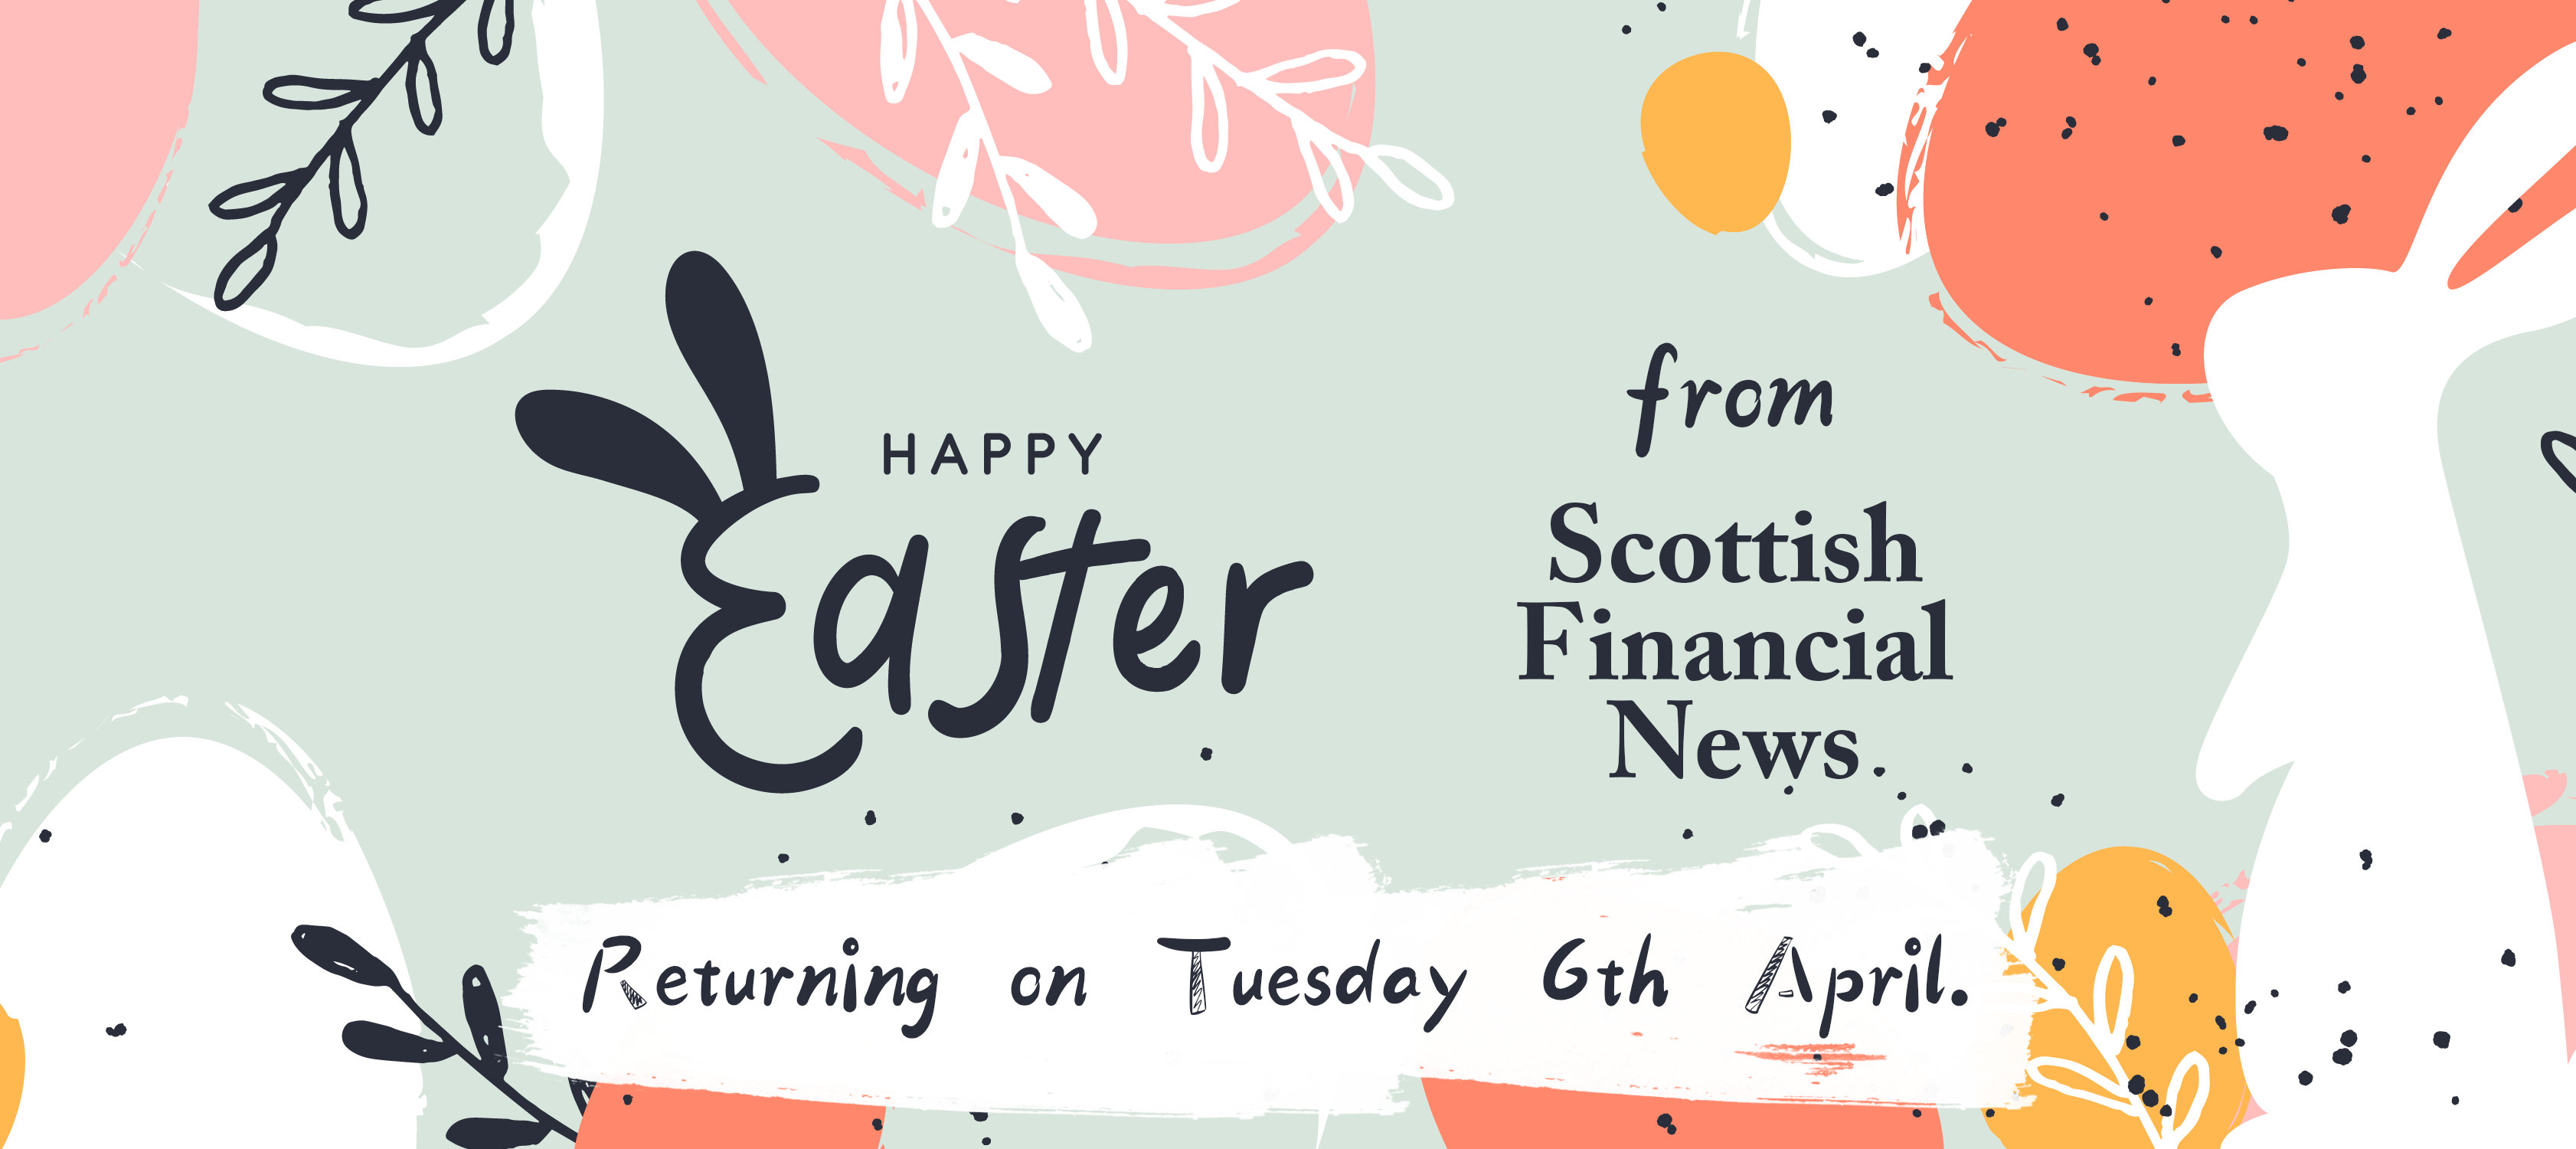 Happy Easter from Scottish Financial News